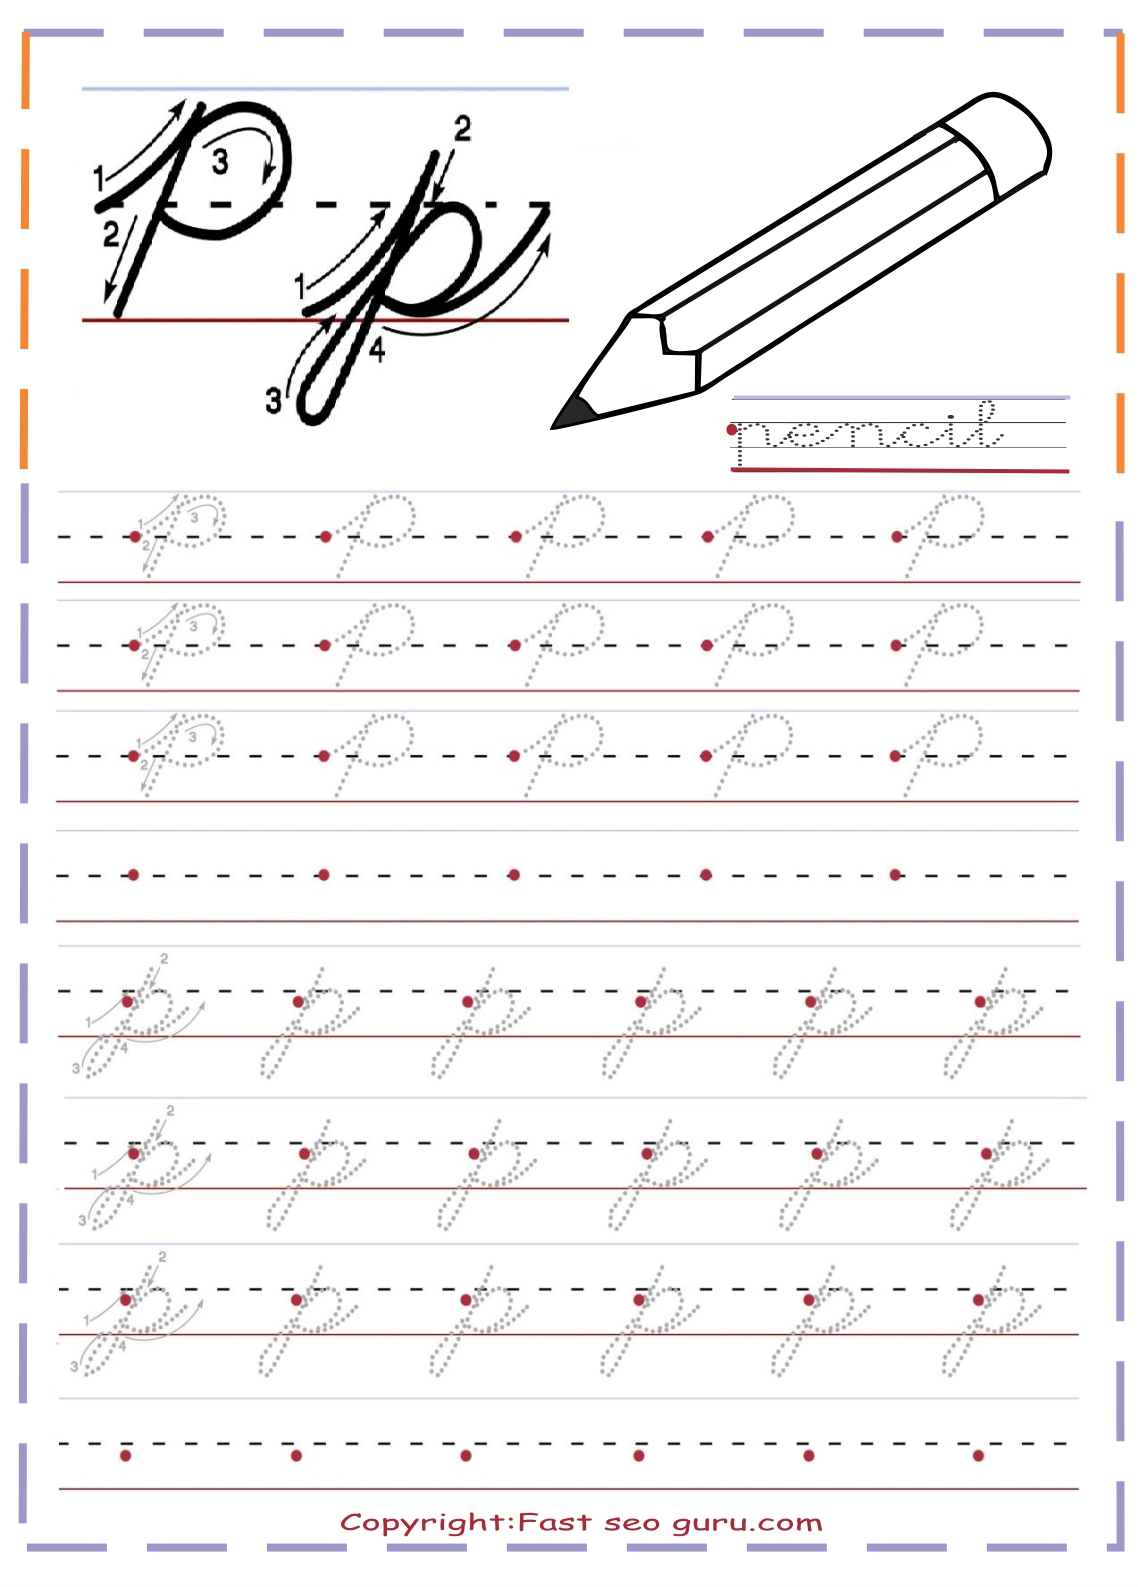 cursive handwriting tracing worksheets letter p for pencil